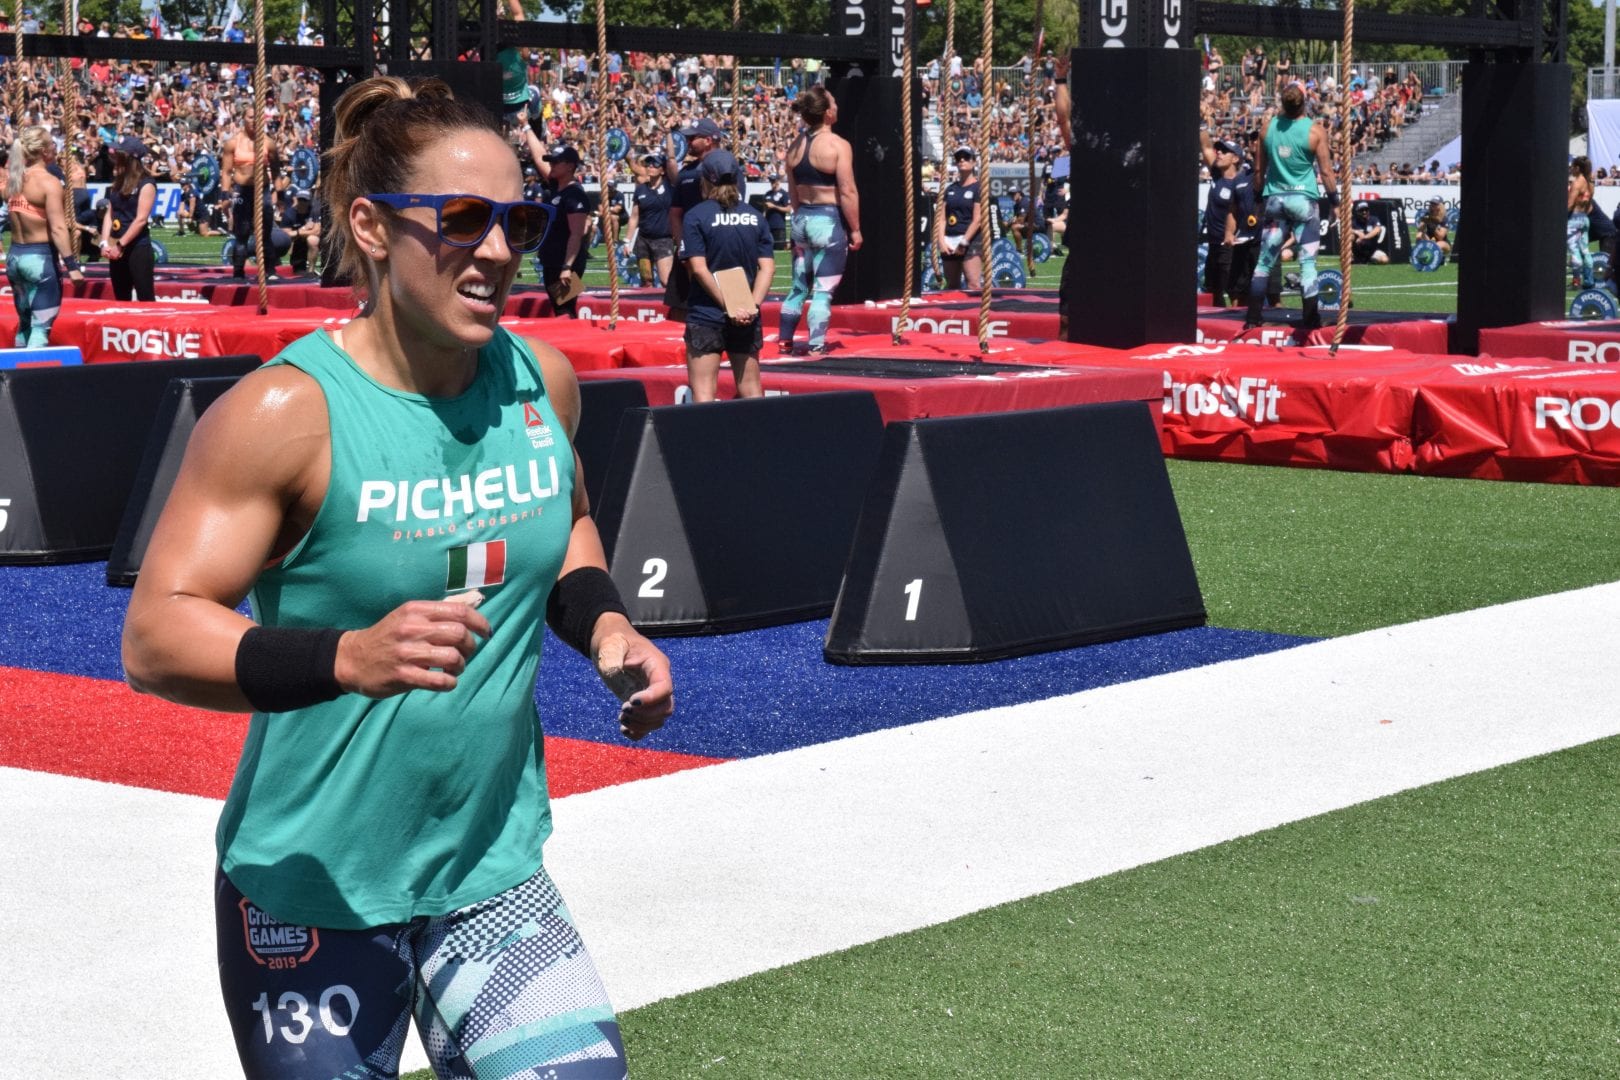 Alessandra Pichelli takes a lap between rounds of legless rope climbs at the 2019 CrossFit Games